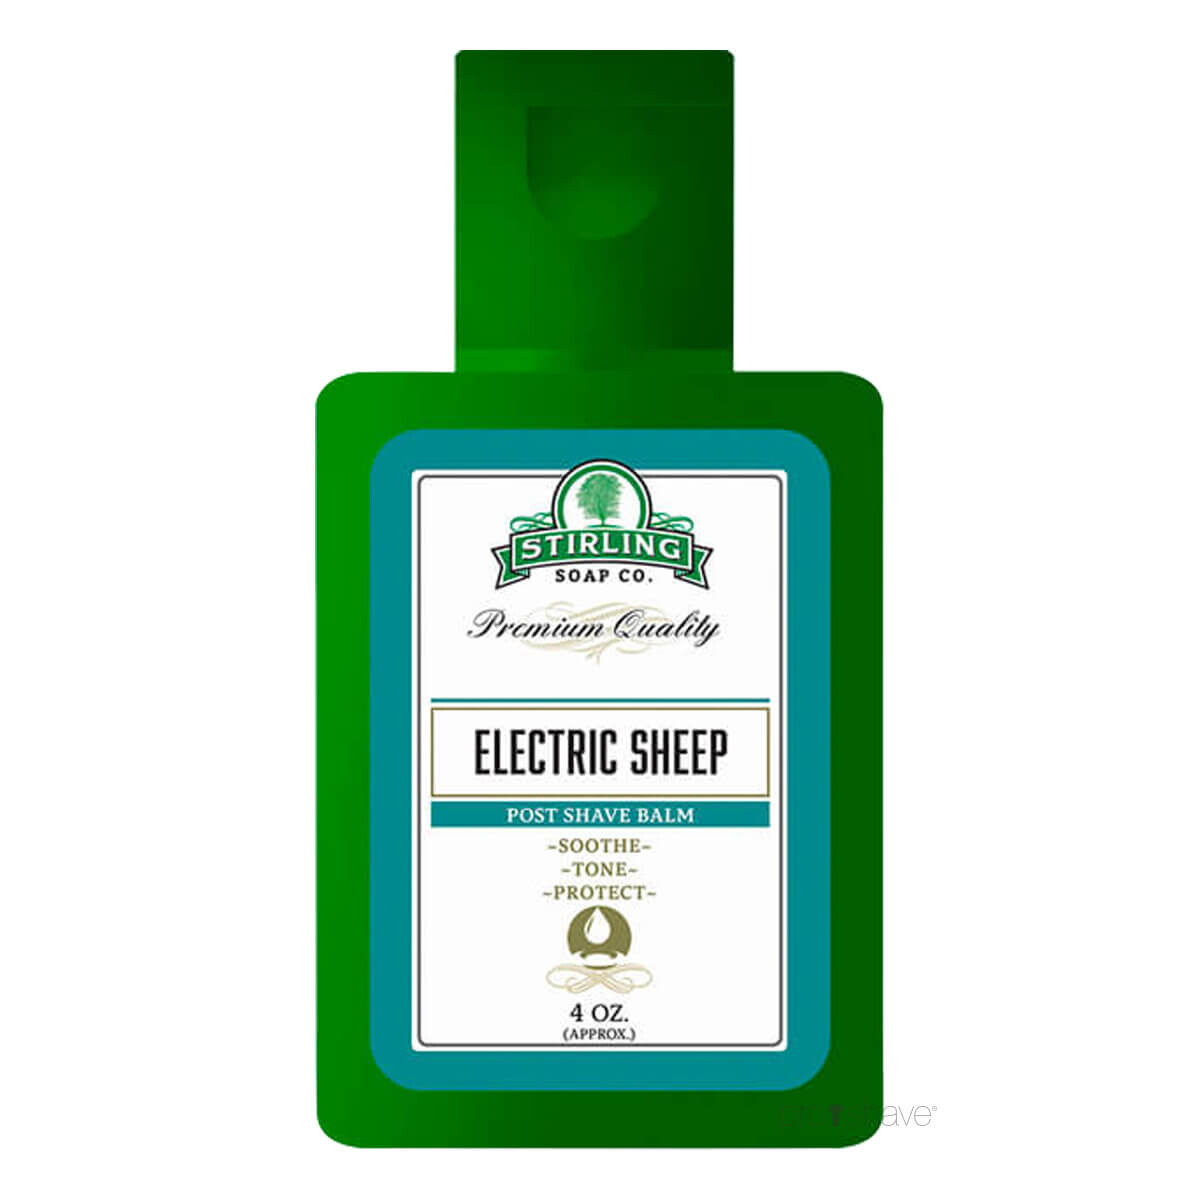 Stirling Soap Co. Aftershave Balm, Electric Sheep, 118 ml.